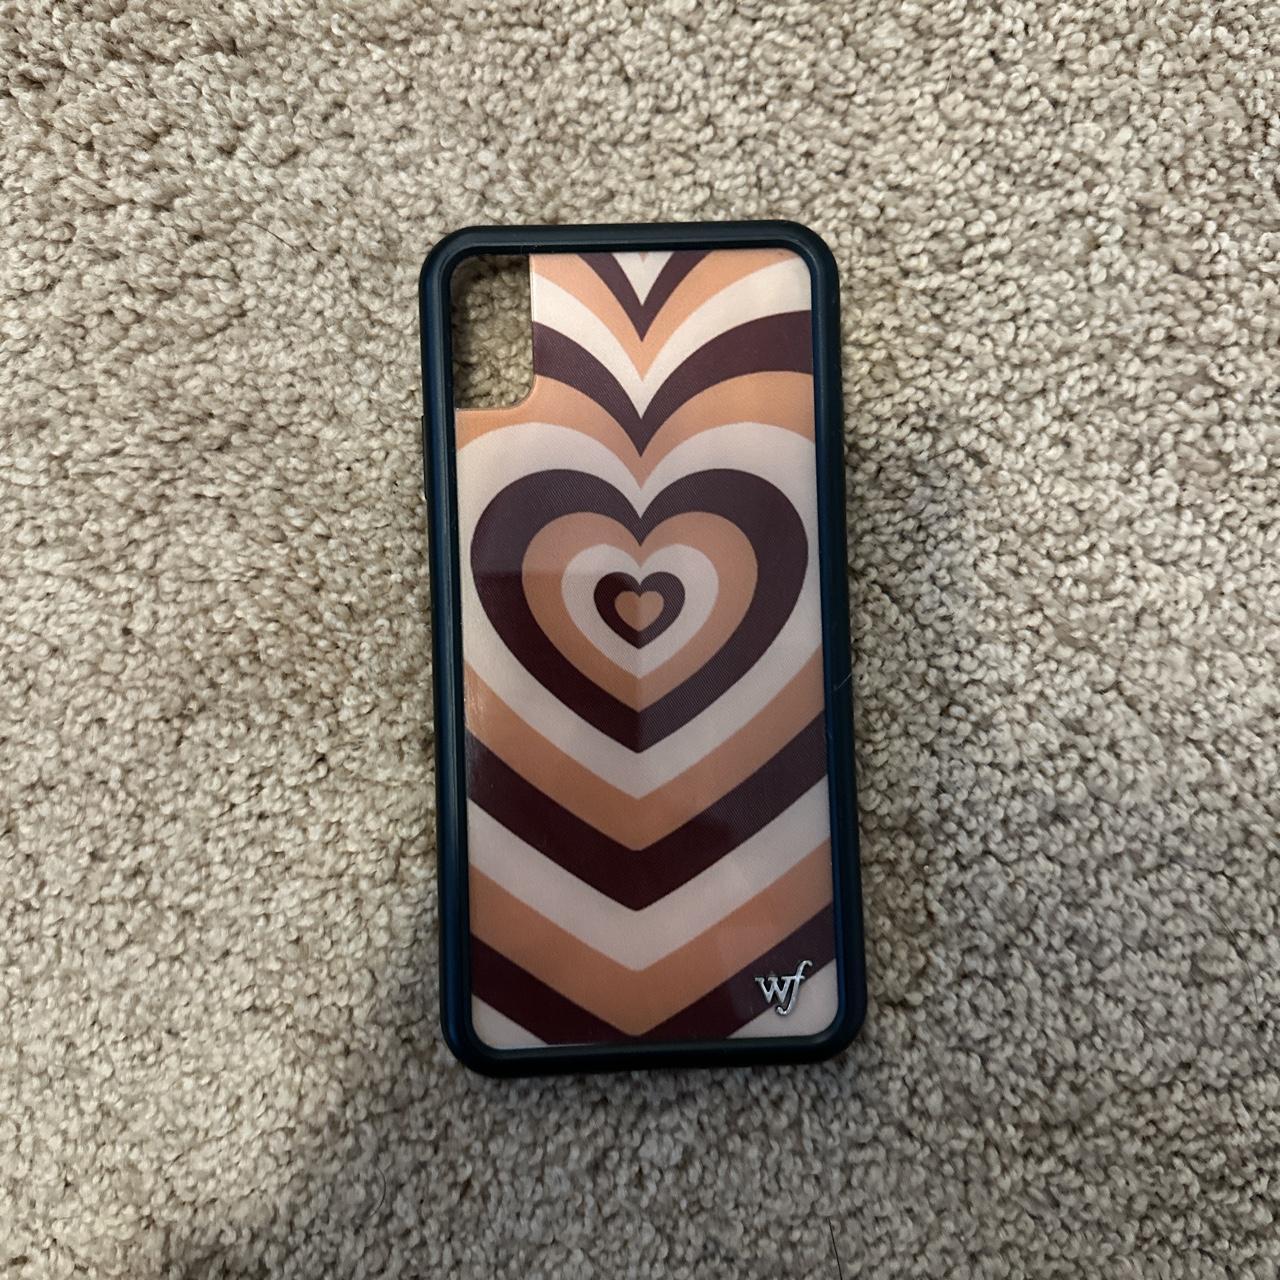 wildflower cases latte love for iphone xs max minor... Depop